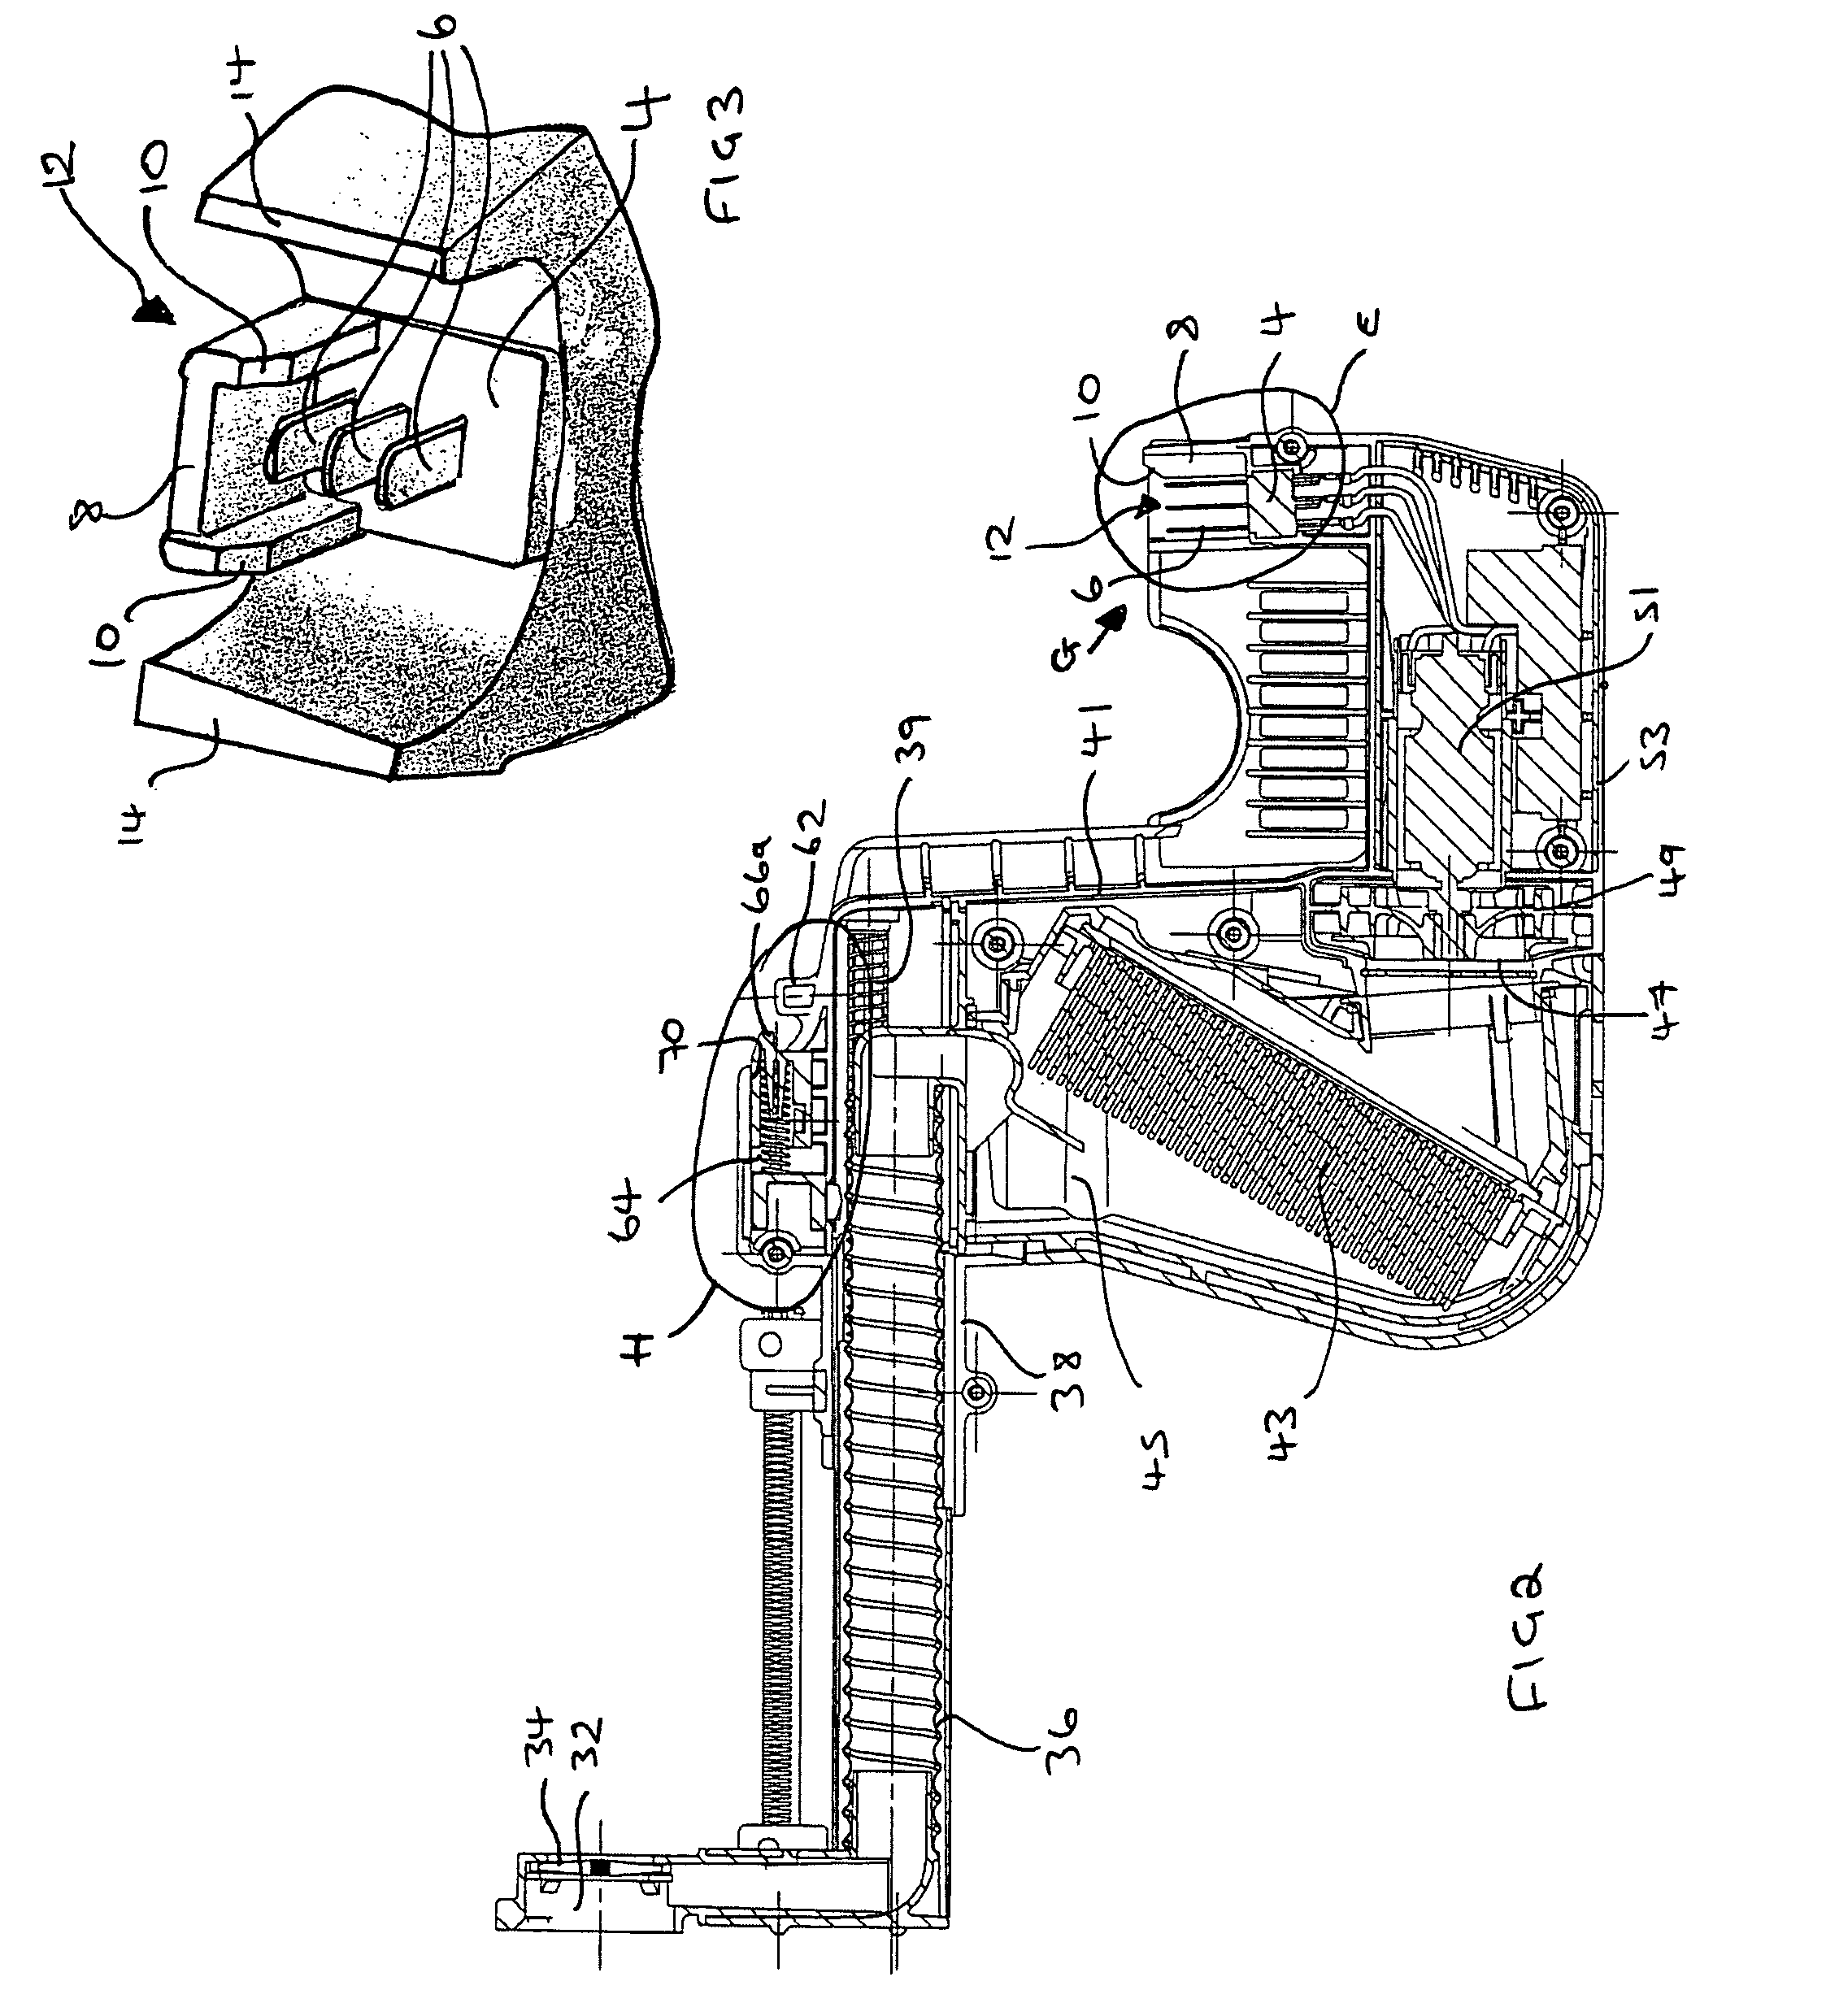 Hand held drilling and/or hammering tool with dust collection unit